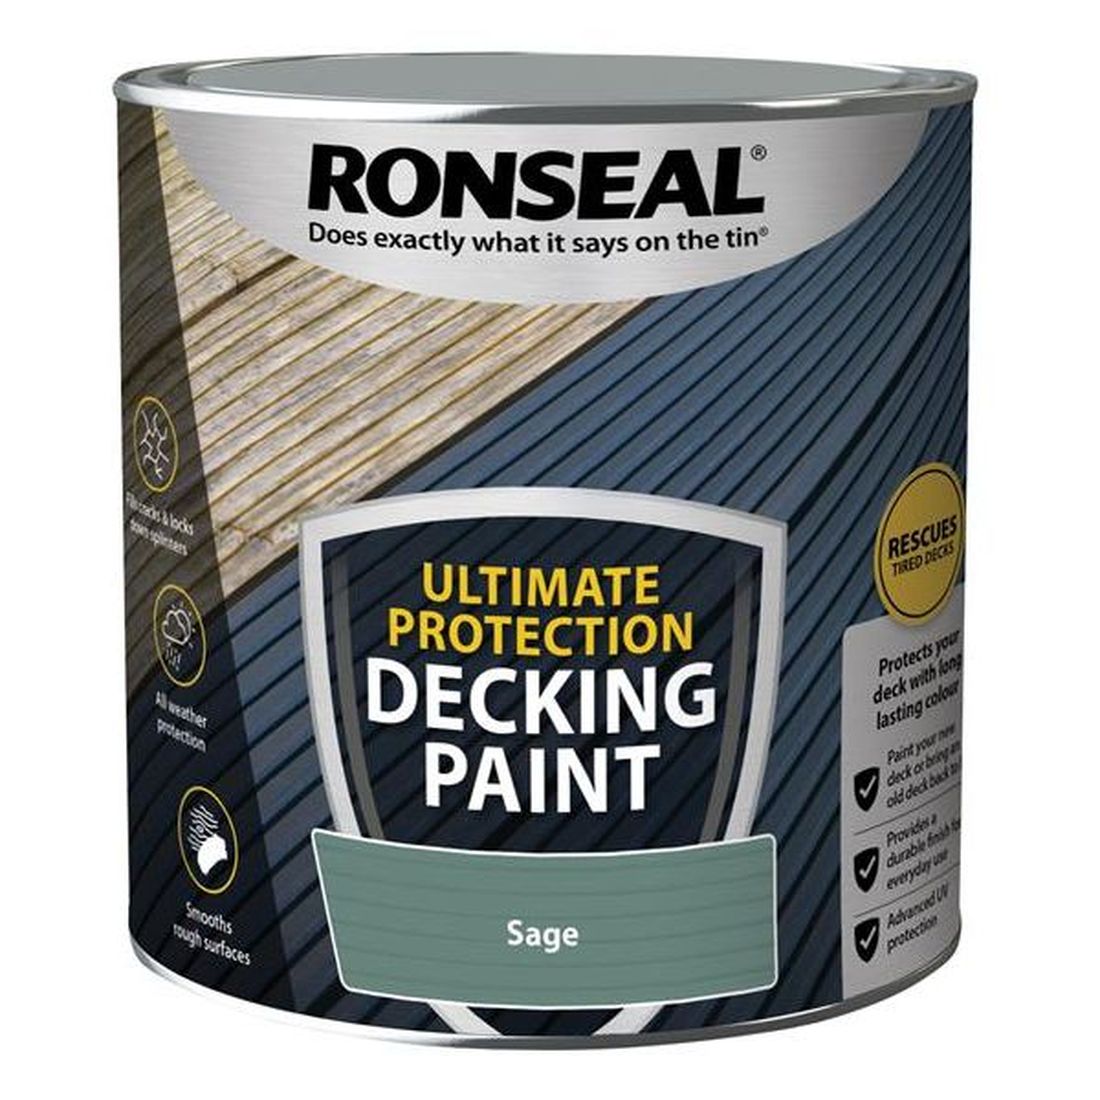 Ronseal Ultimate Protection Decking Paint Sage 2.5 litre                                